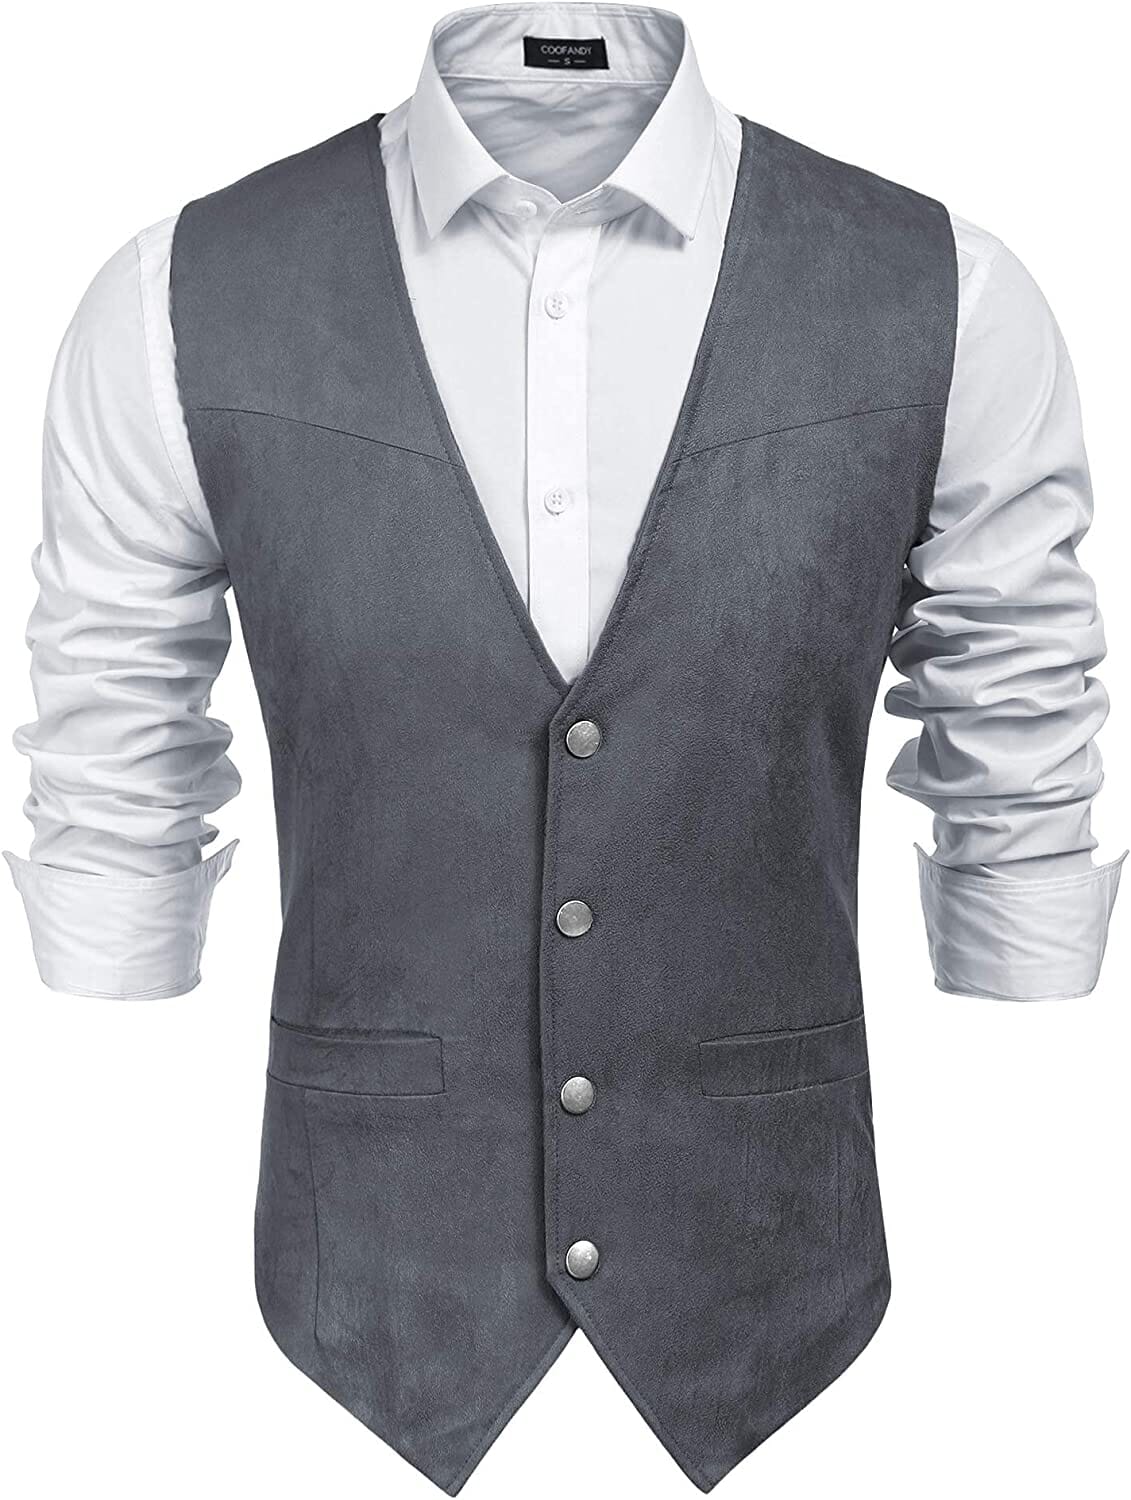 Solid Suede Leather Suit Vest (US Only) Vest COOFANDY Store Grey S 